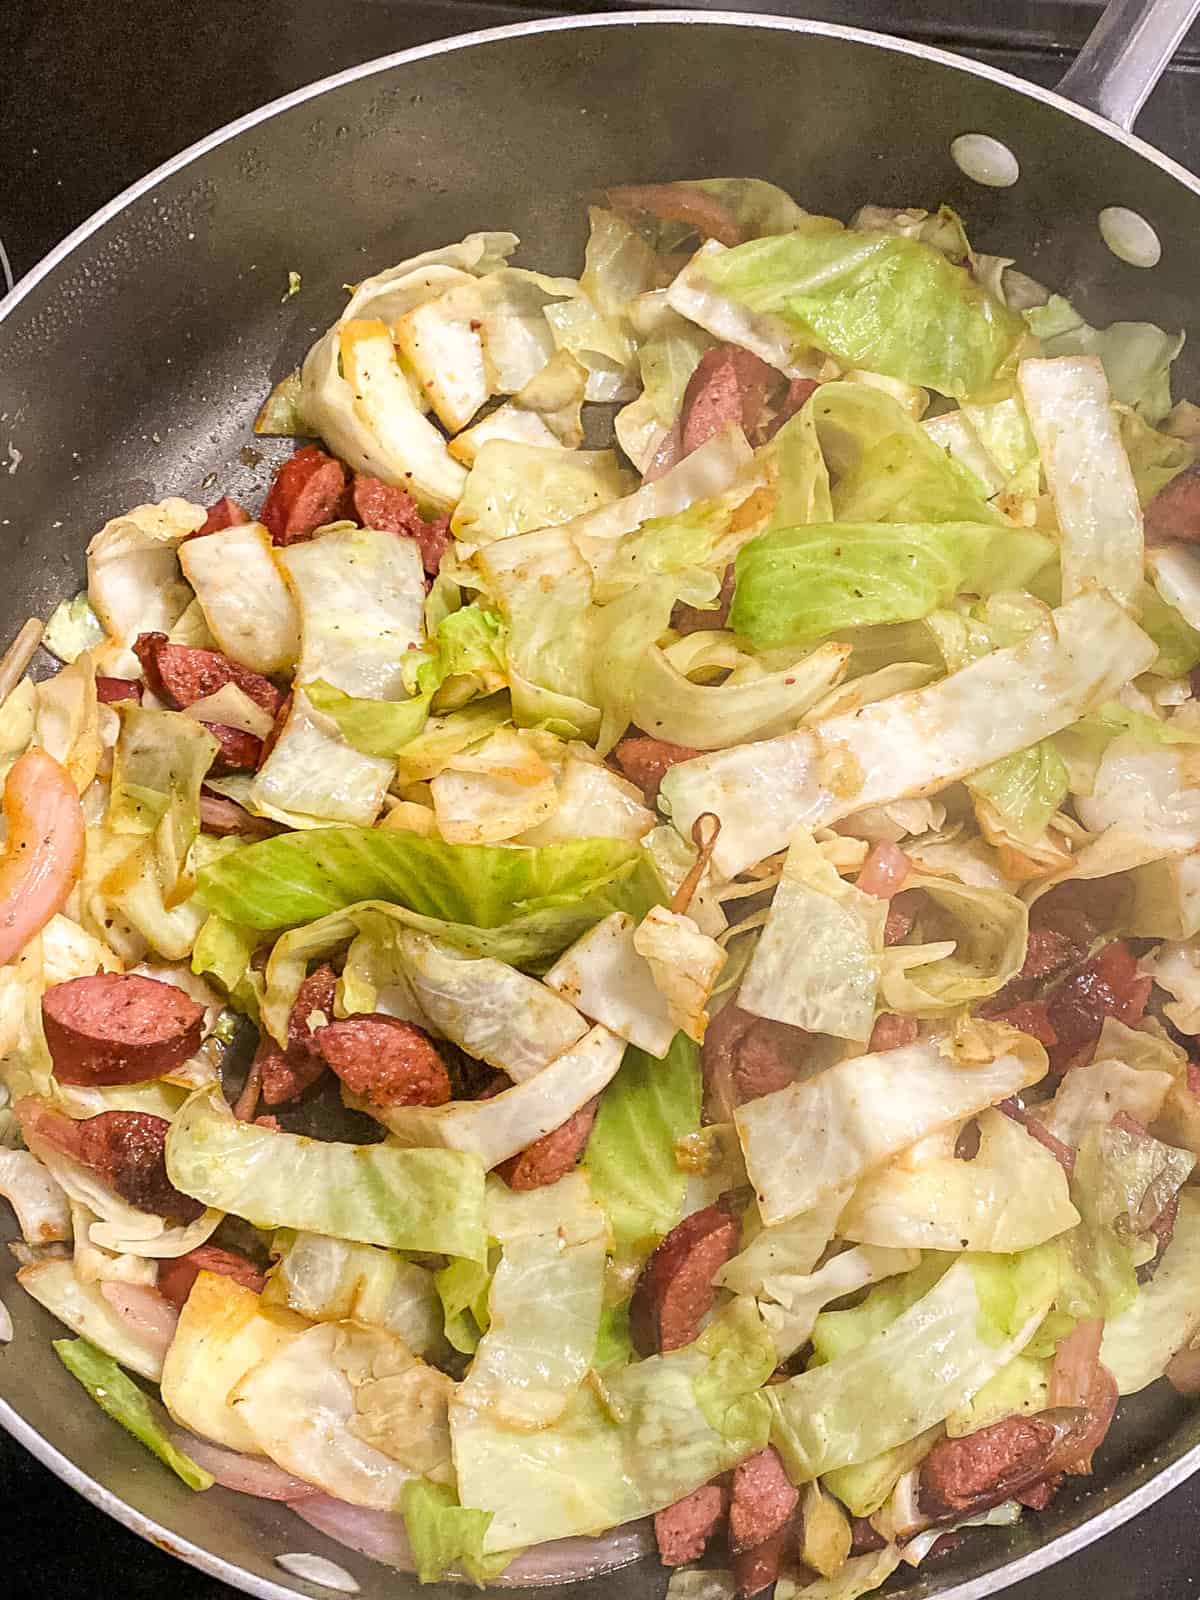 fried cabbage and smoked sausage simmering in a skillet